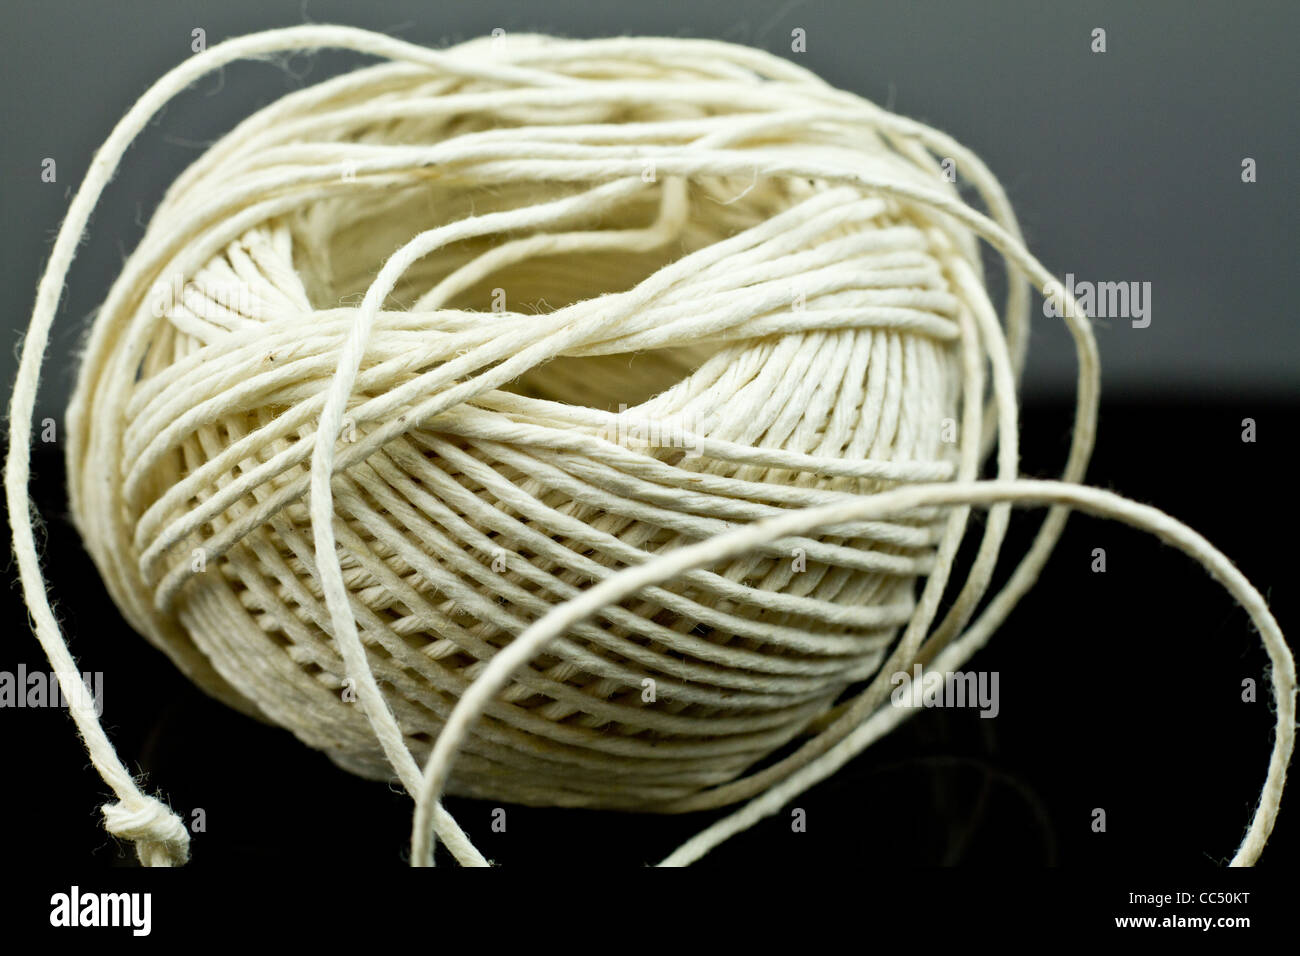 A loose ball of twine Stock Photo - Alamy